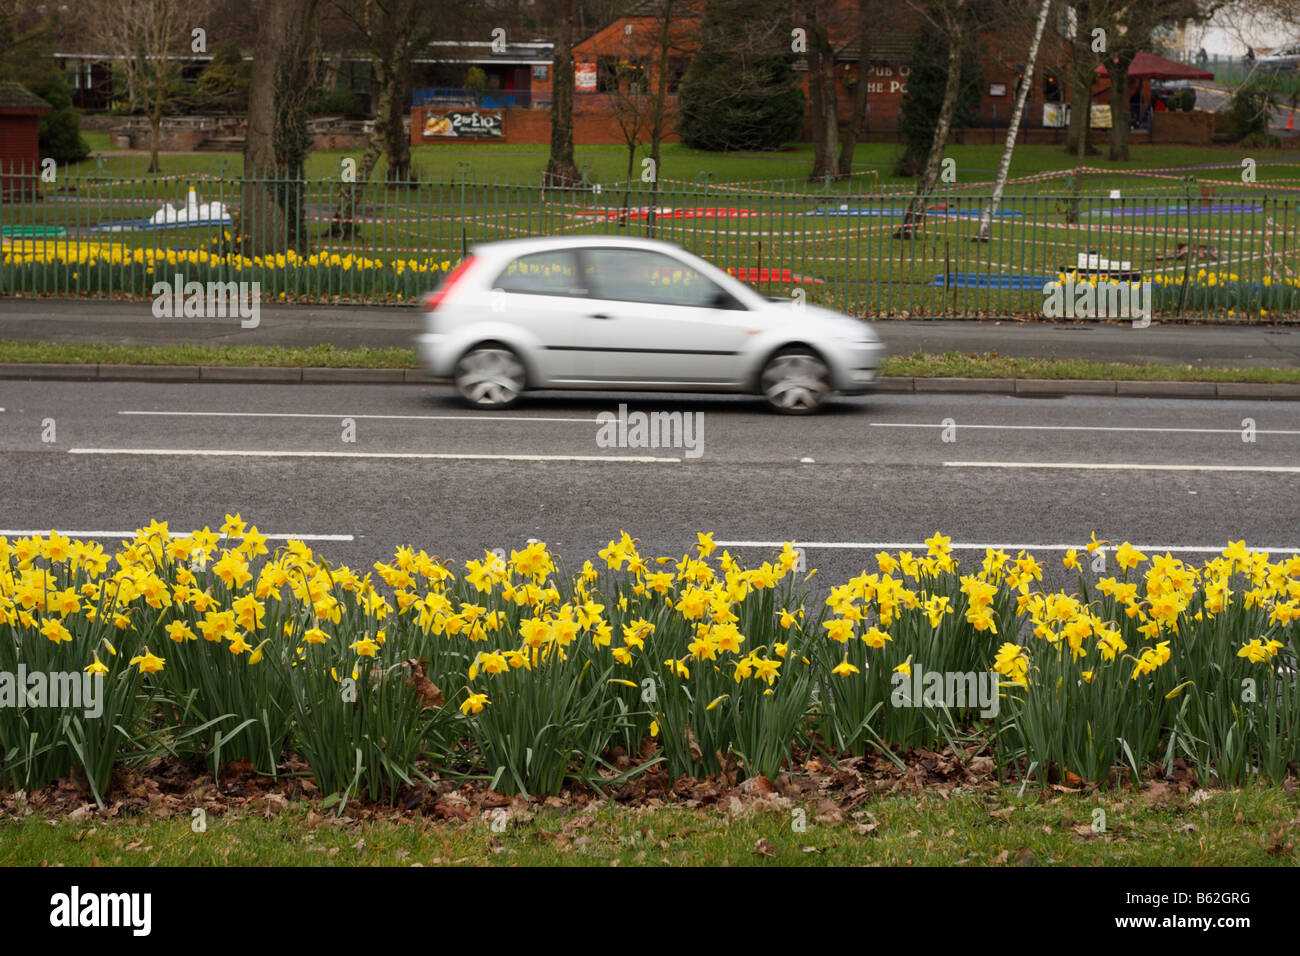 Spring Daffodils Providing a colourful display on roadside verges of Oystermouth Road, Swansea, Wales, U.K. Stock Photo